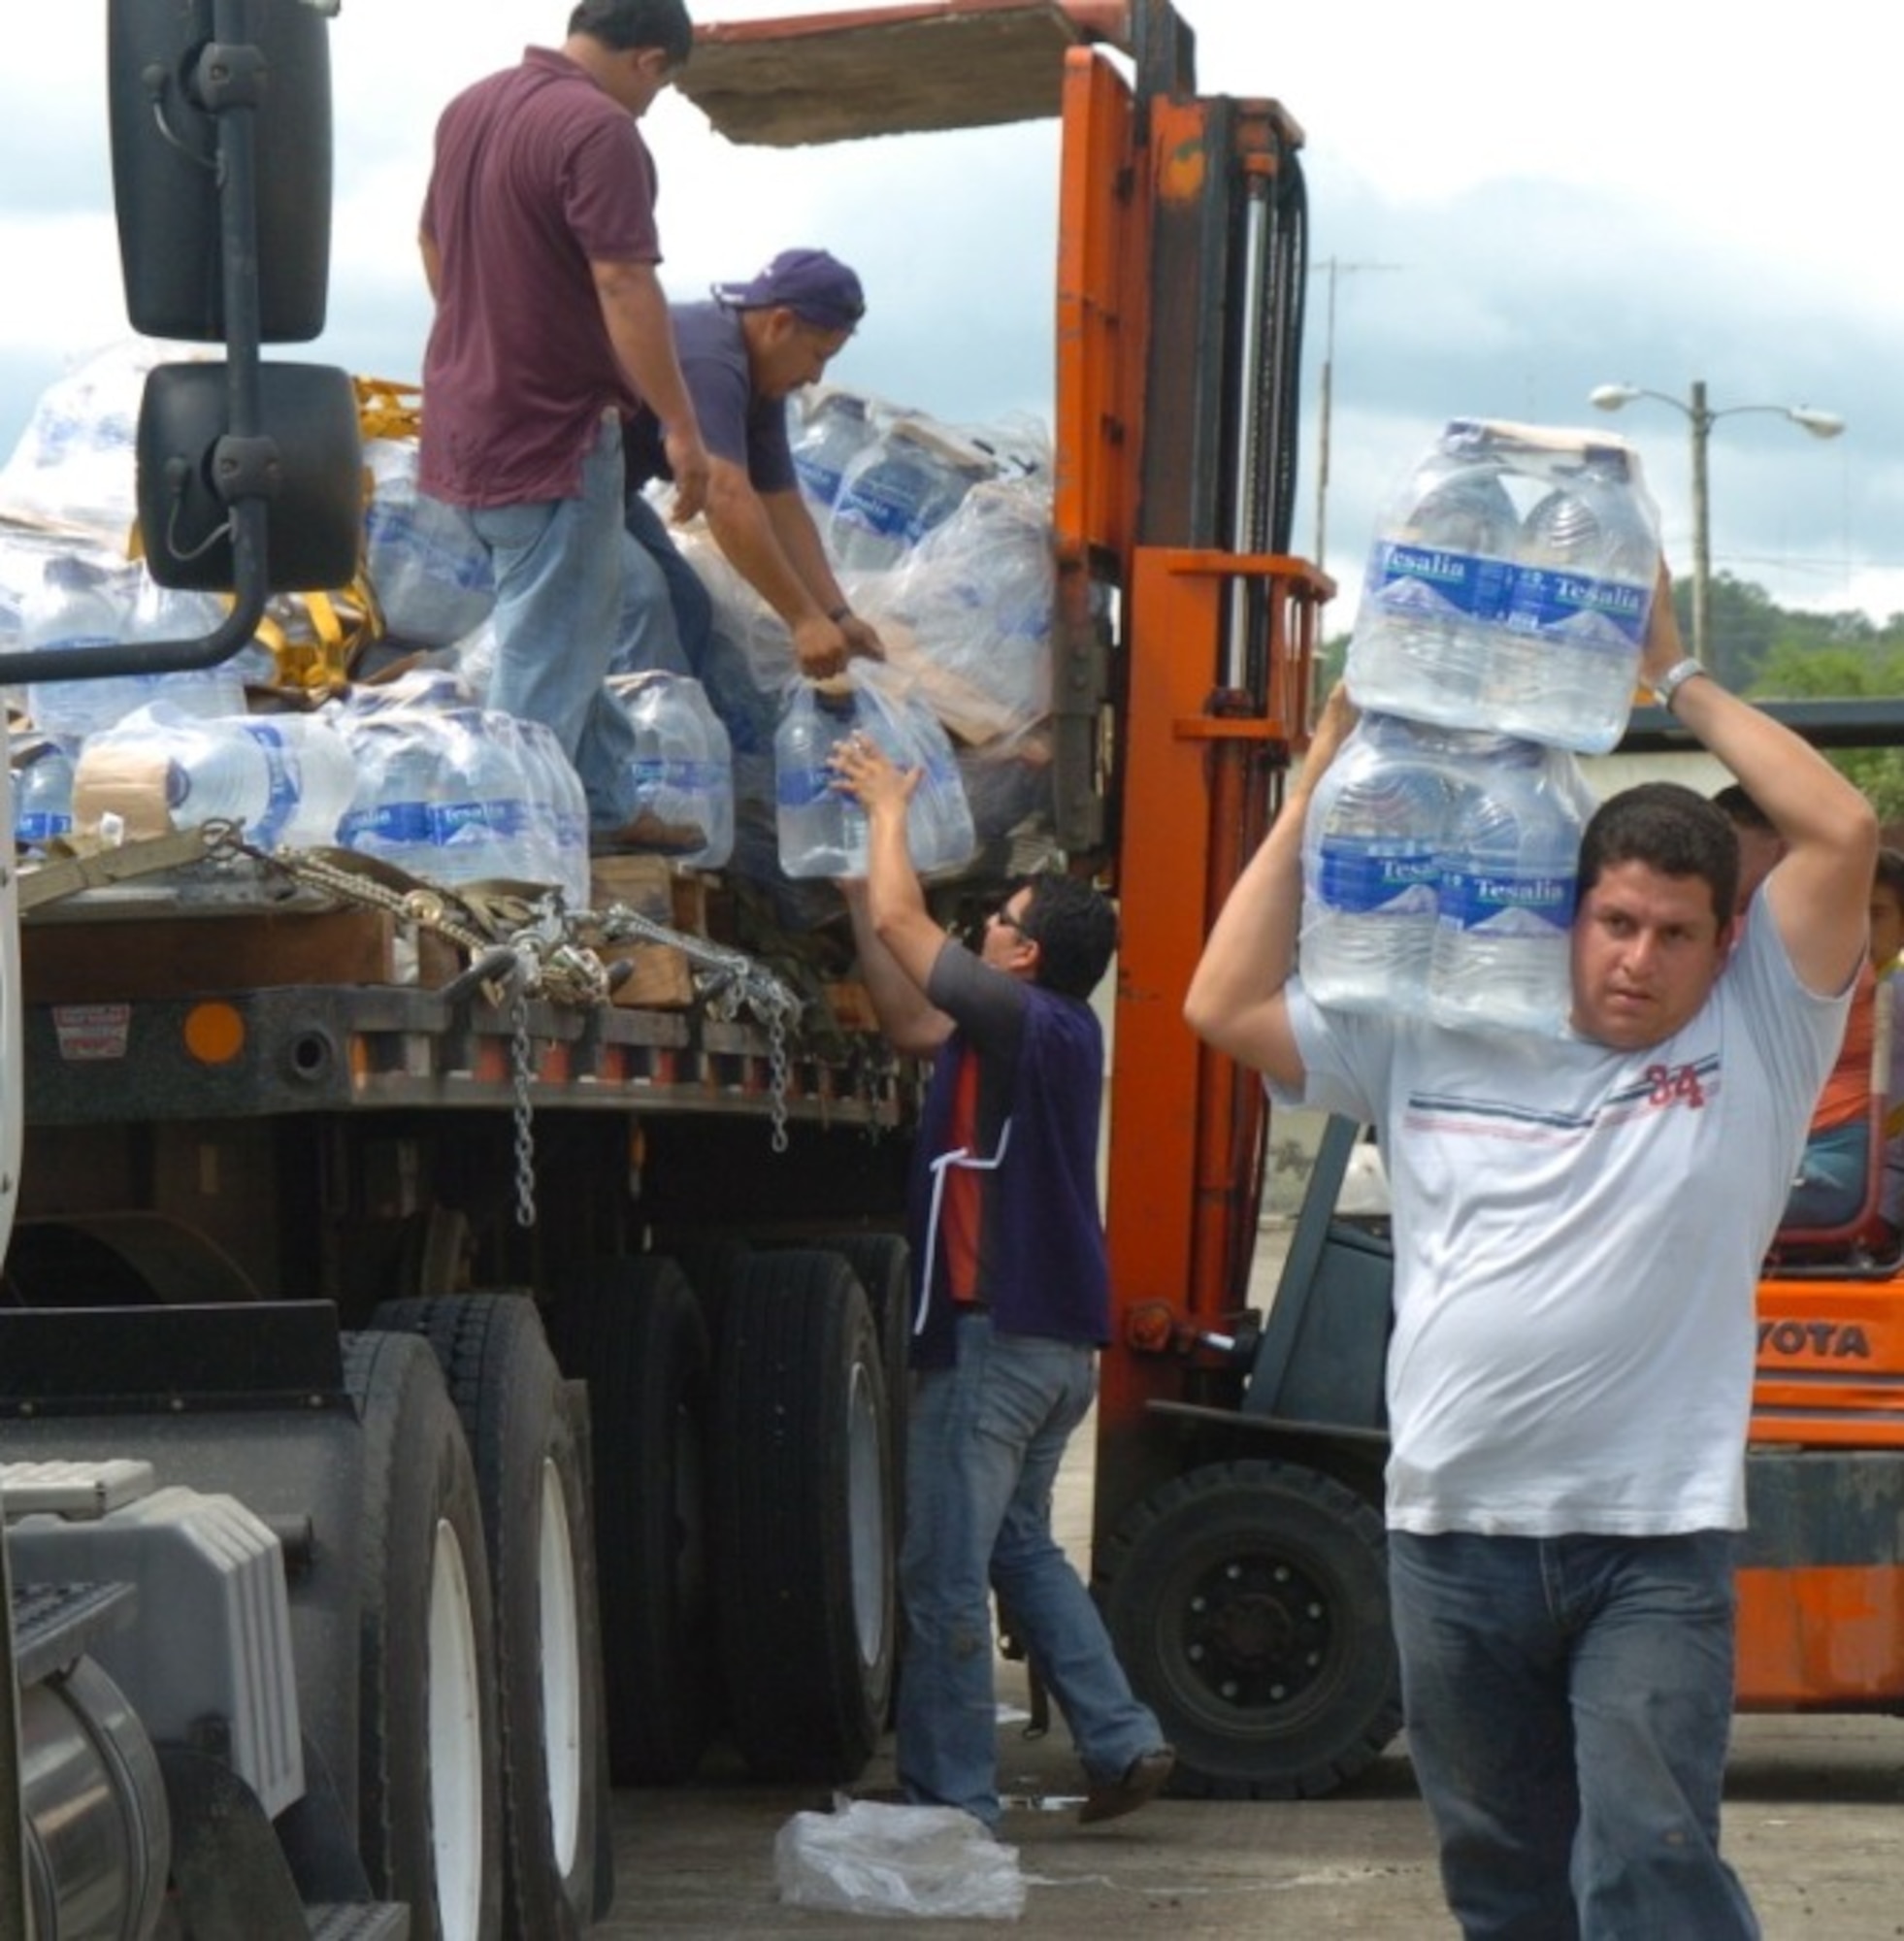 It took a group of roughly 25 volunteers over two hours to unload the IV bags, toilet paper and 2,571 one-gallon bottles of water into a storage room at the Napoleon Billa hospital in Chone, Ecuador.  They received $4,000 worth of flood relief supplies to help them recover and resupply from flood waters that had risen up to four feet high.  This is the worst flooding in two decades in Ecuador with 14 of the 23 provinces being negatively impacted by flood waters.  